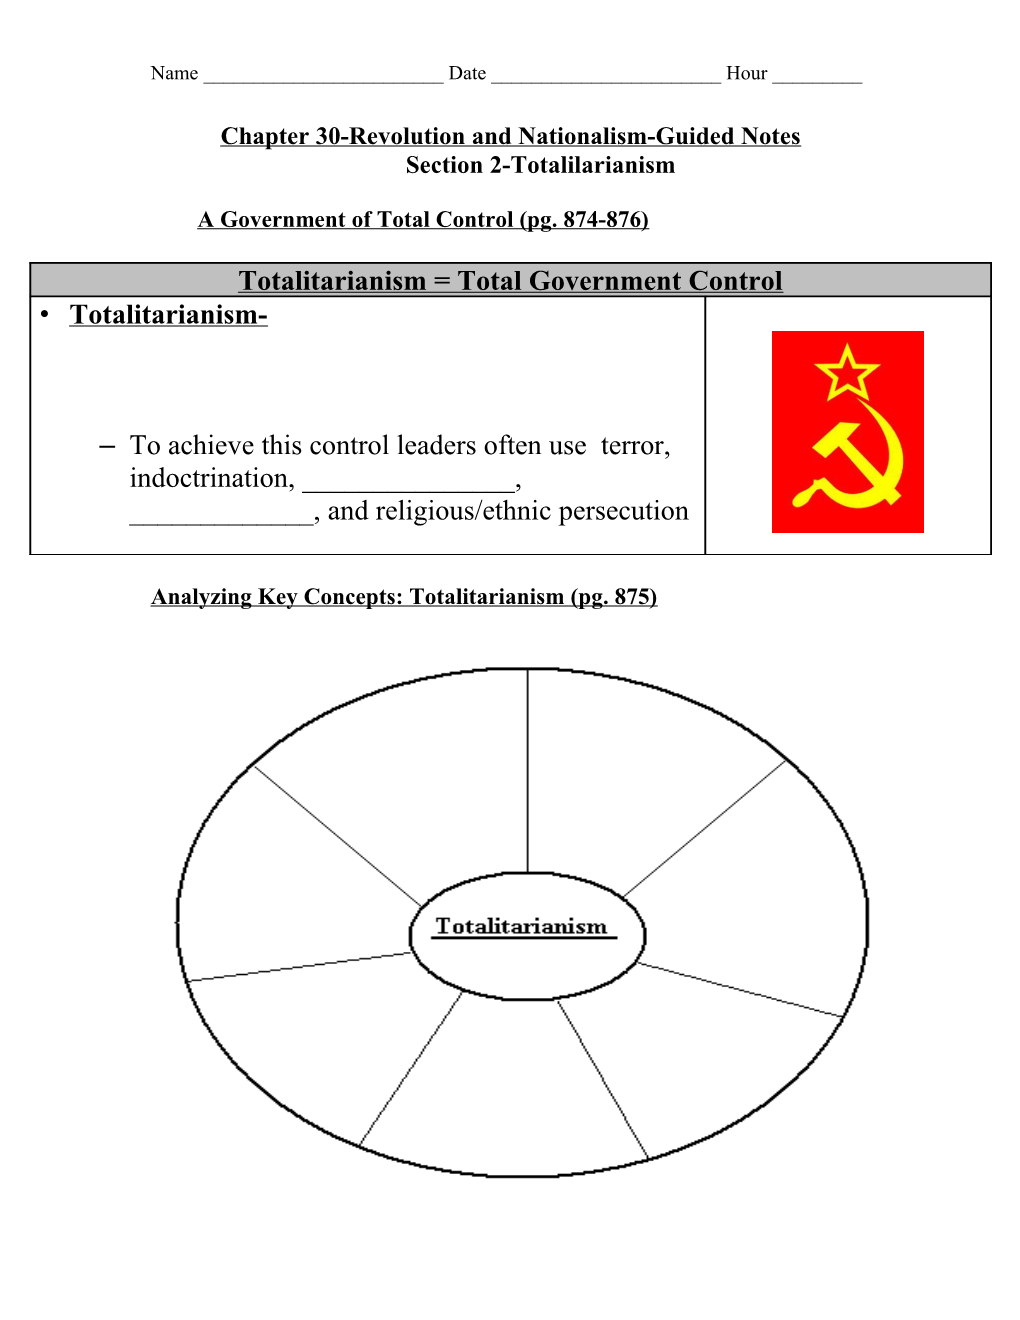 Chapter 22-Enlightenment and Revolution-Guided Notes